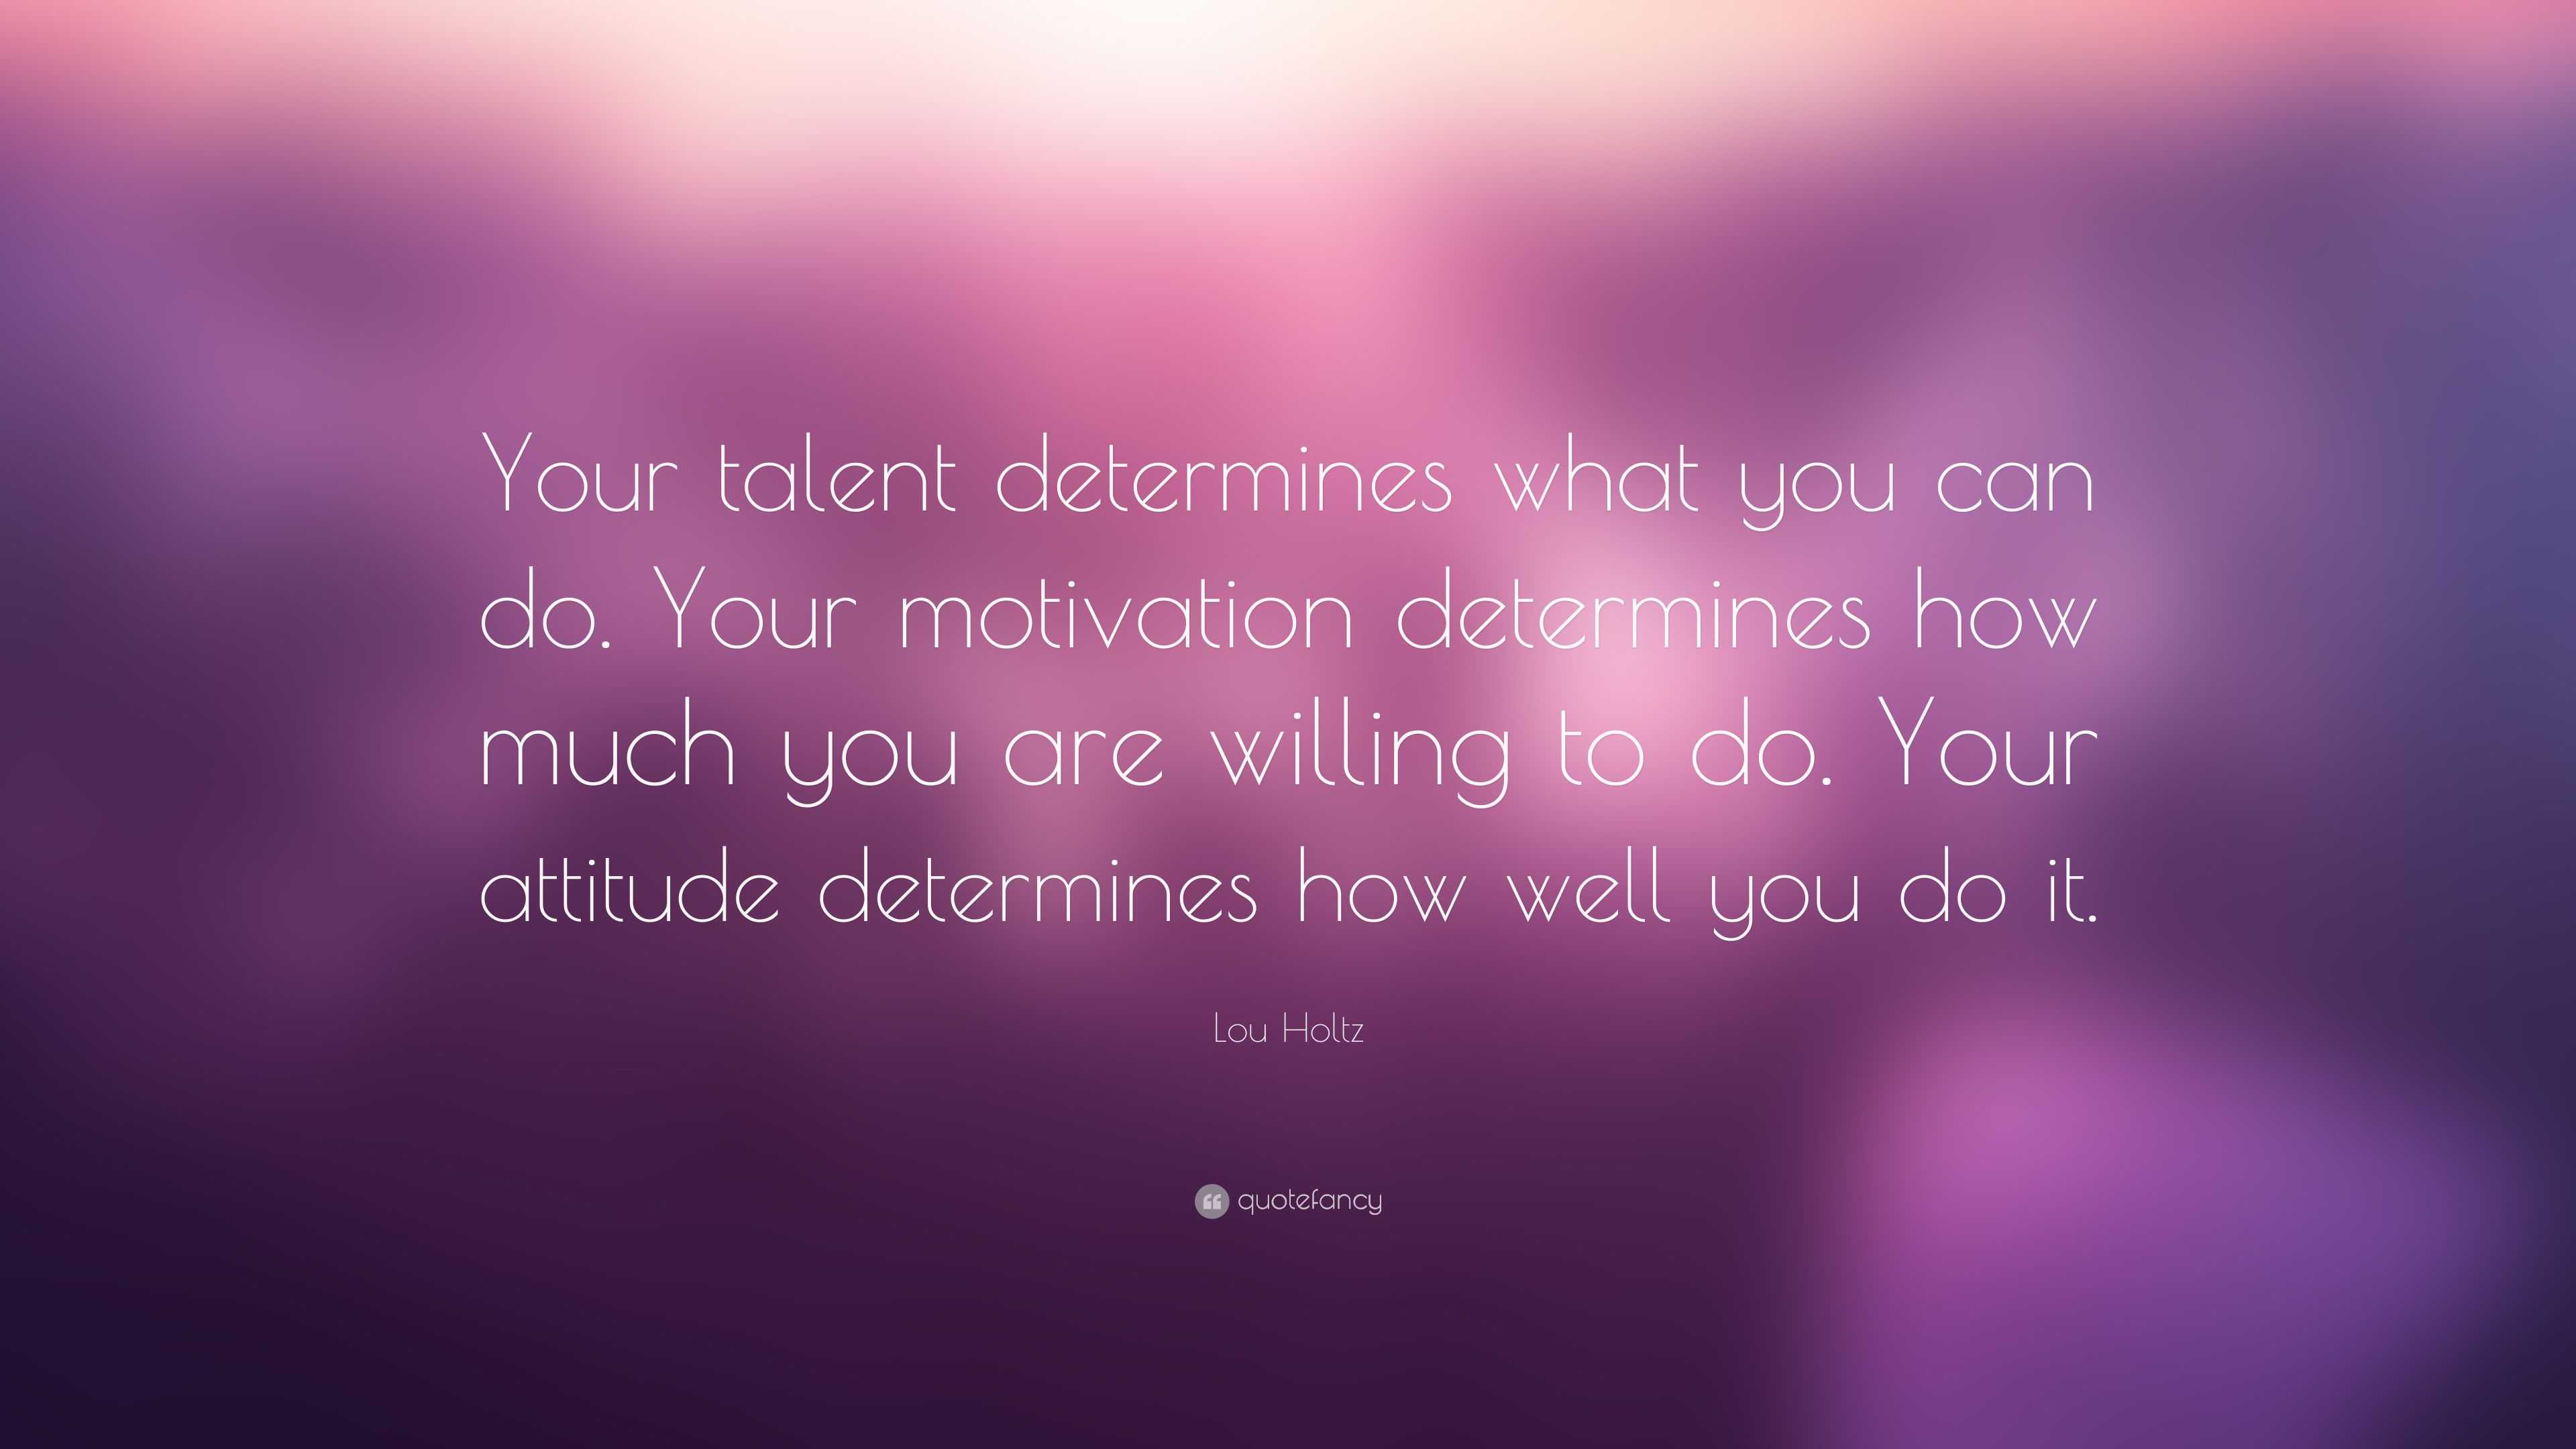 Lou Holtz Quote: “Your talent determines what you can do. Your ...